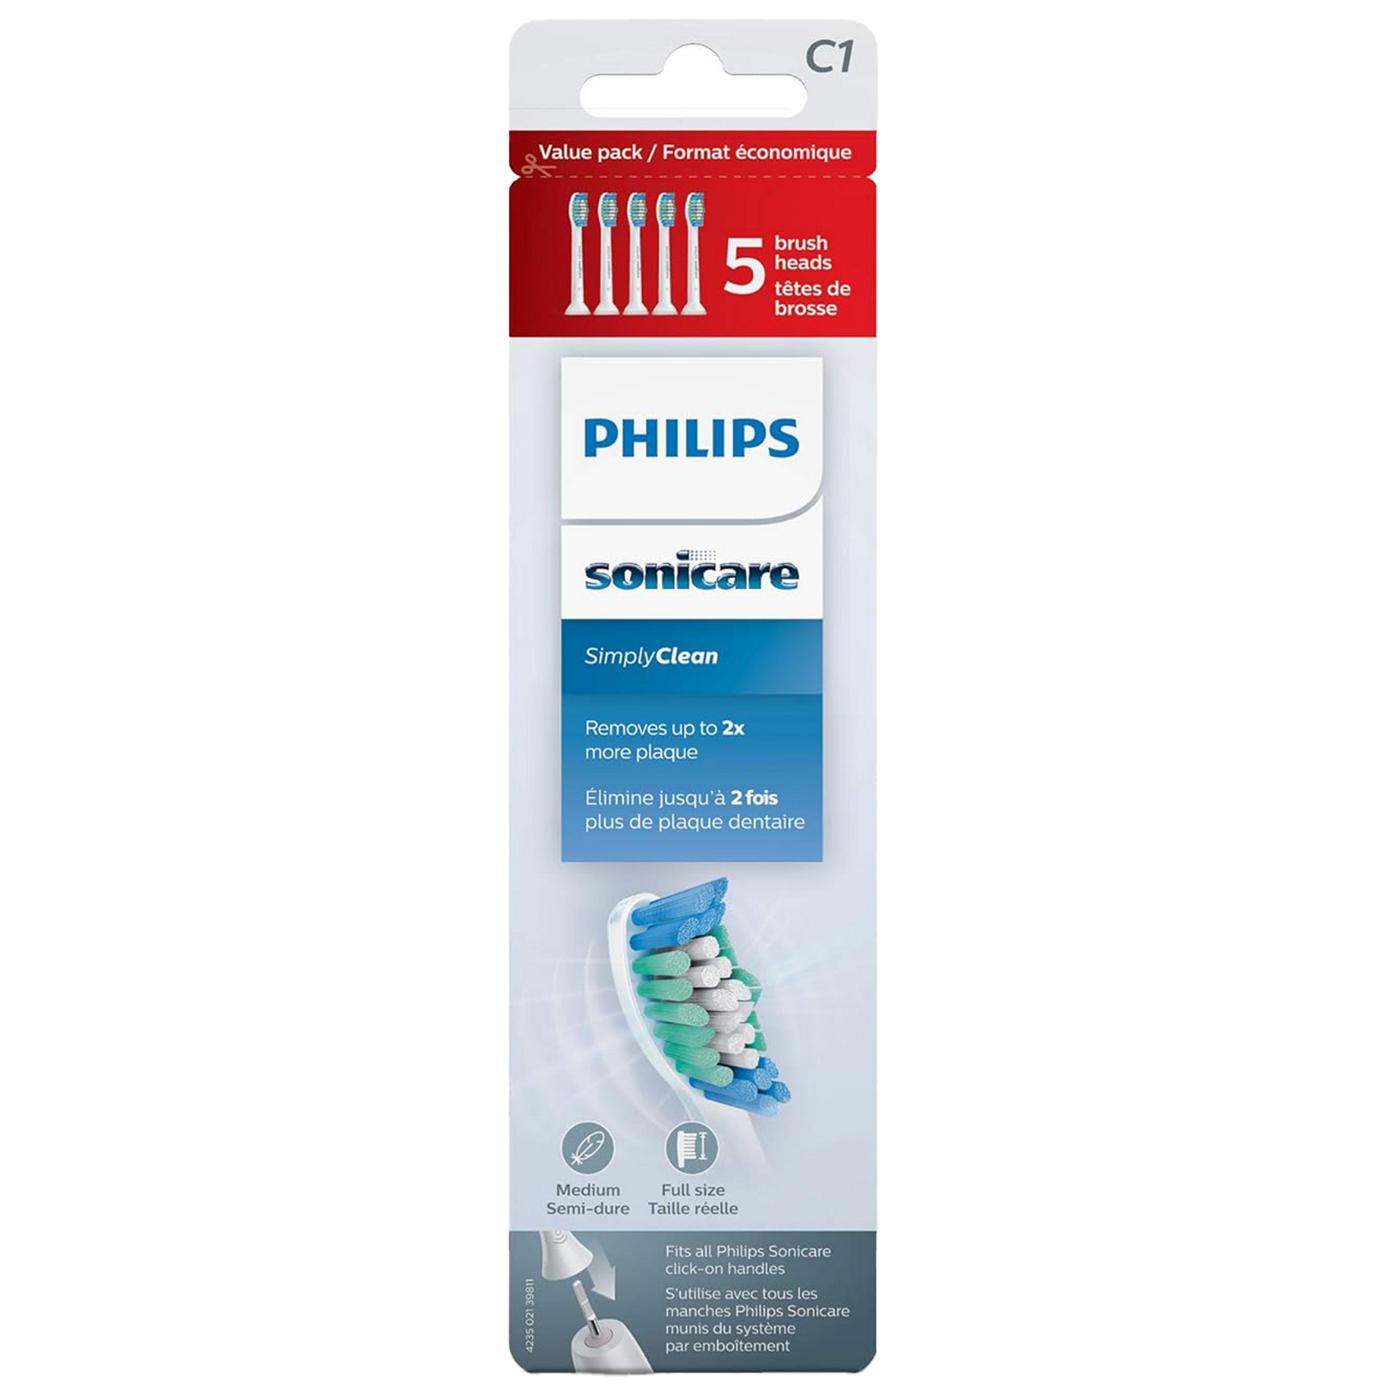 Philips Sonicare Simply Clean Brush Heads C1; image 1 of 3